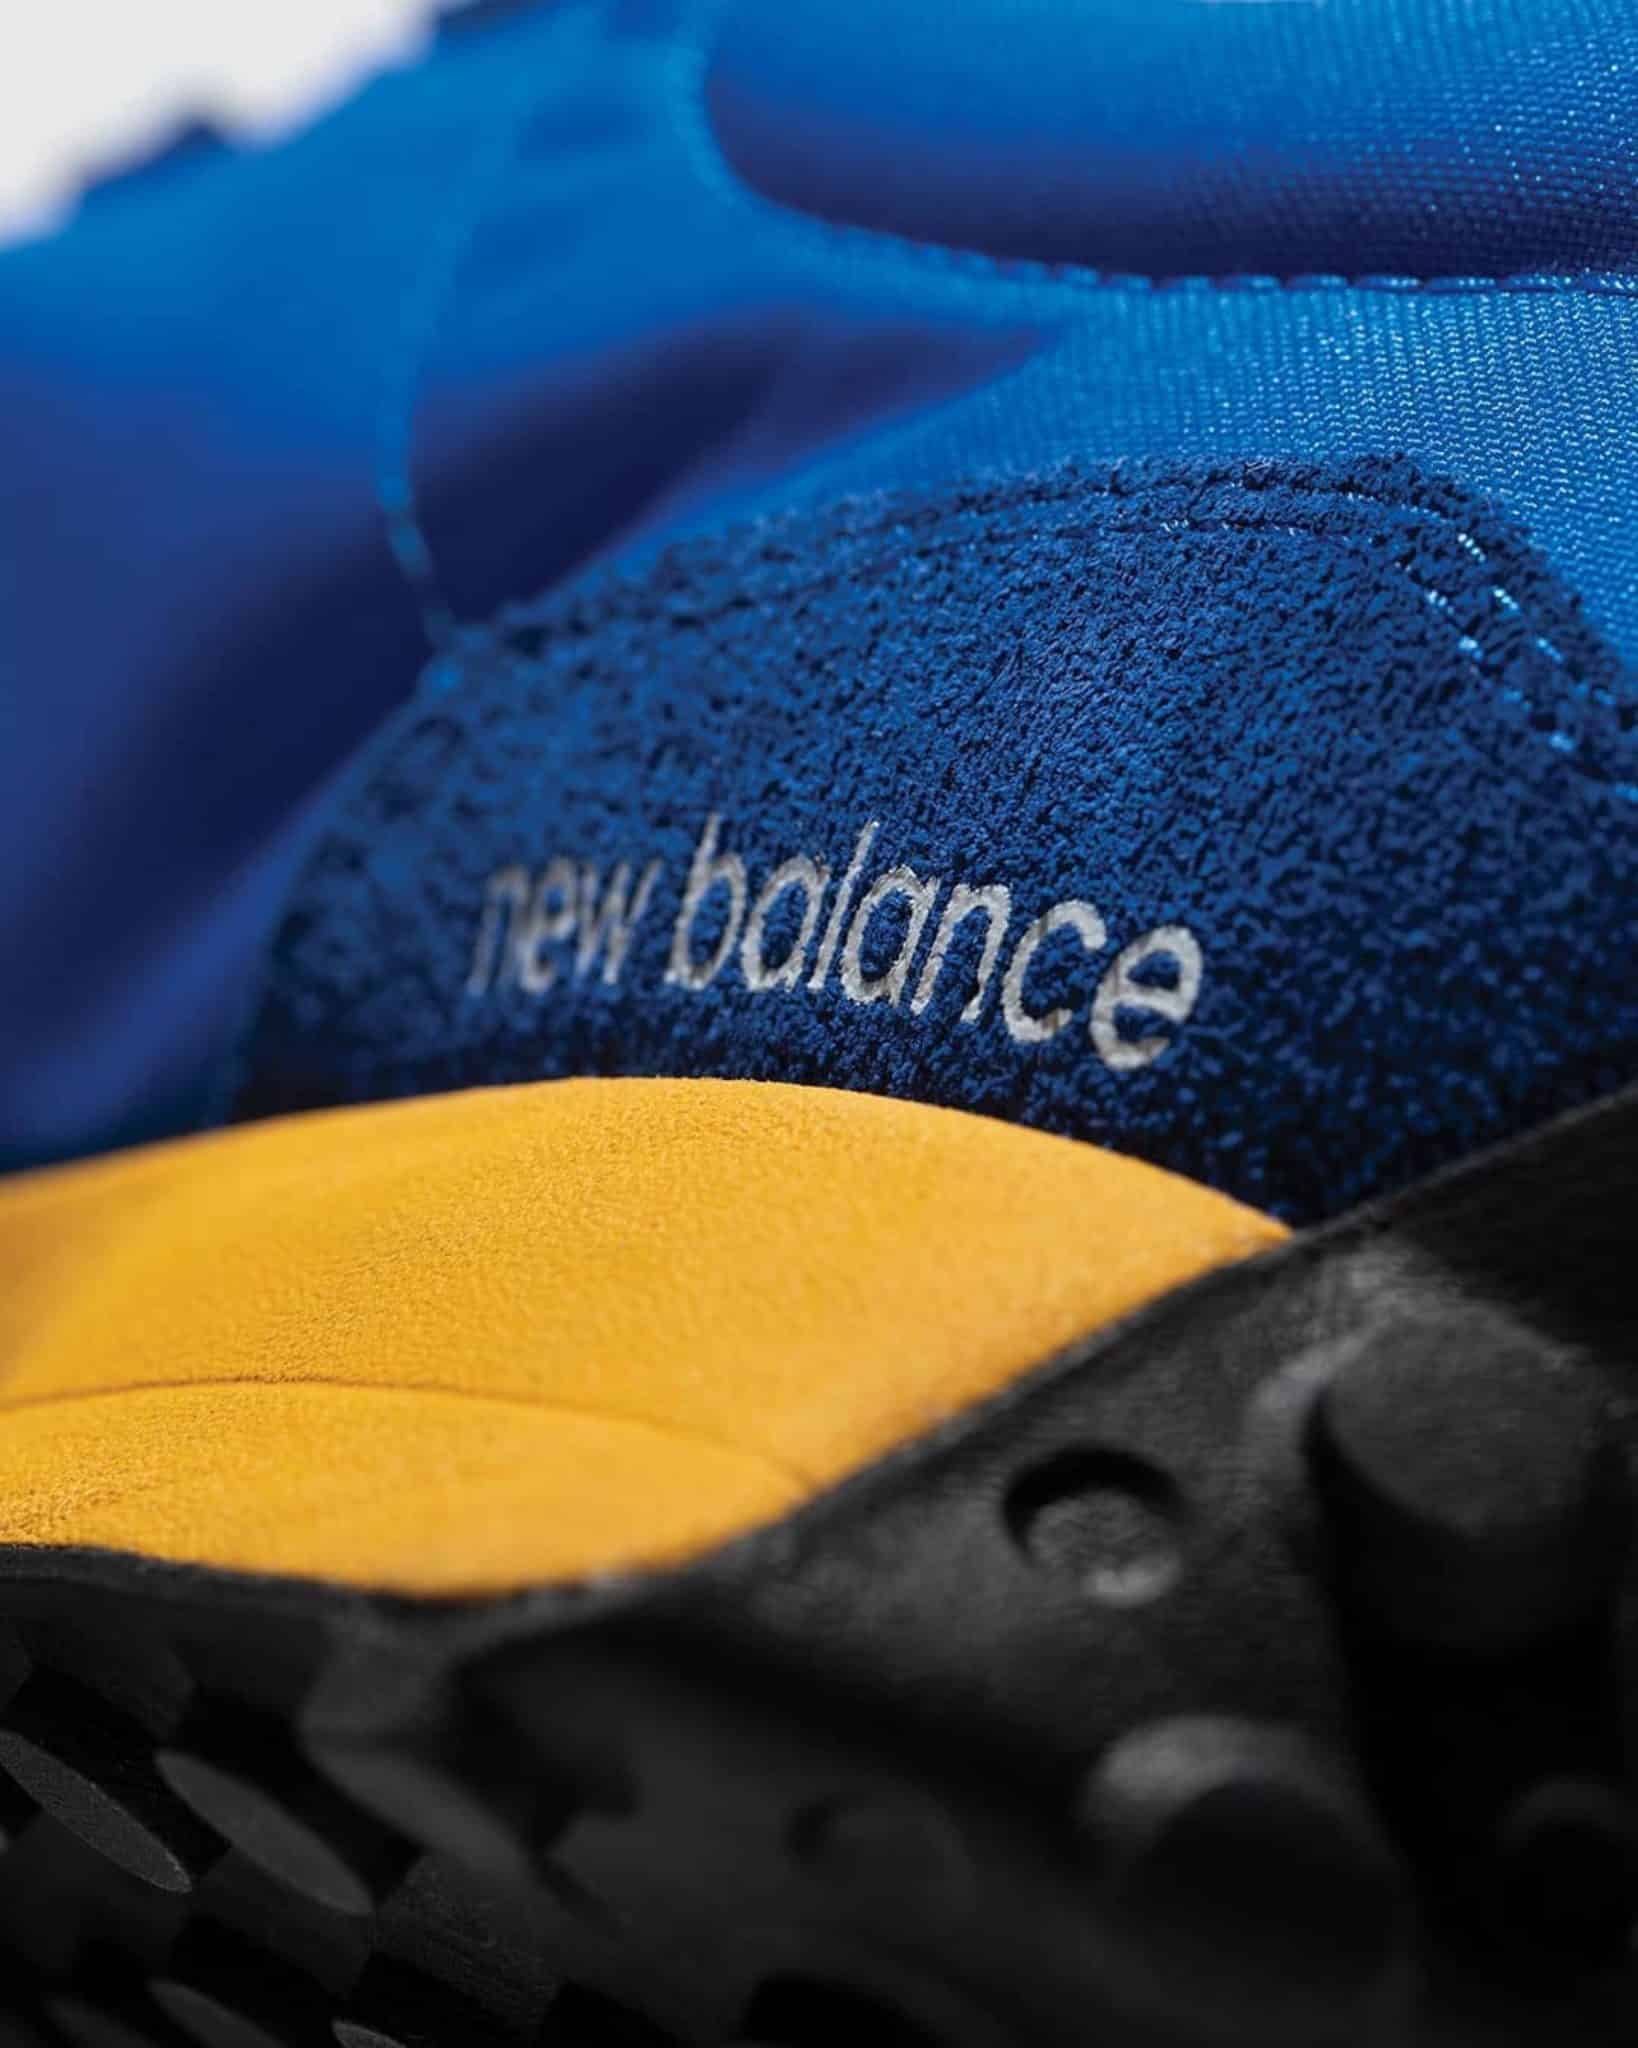 New Balance 327 In Another Blue And Yellow Colorway